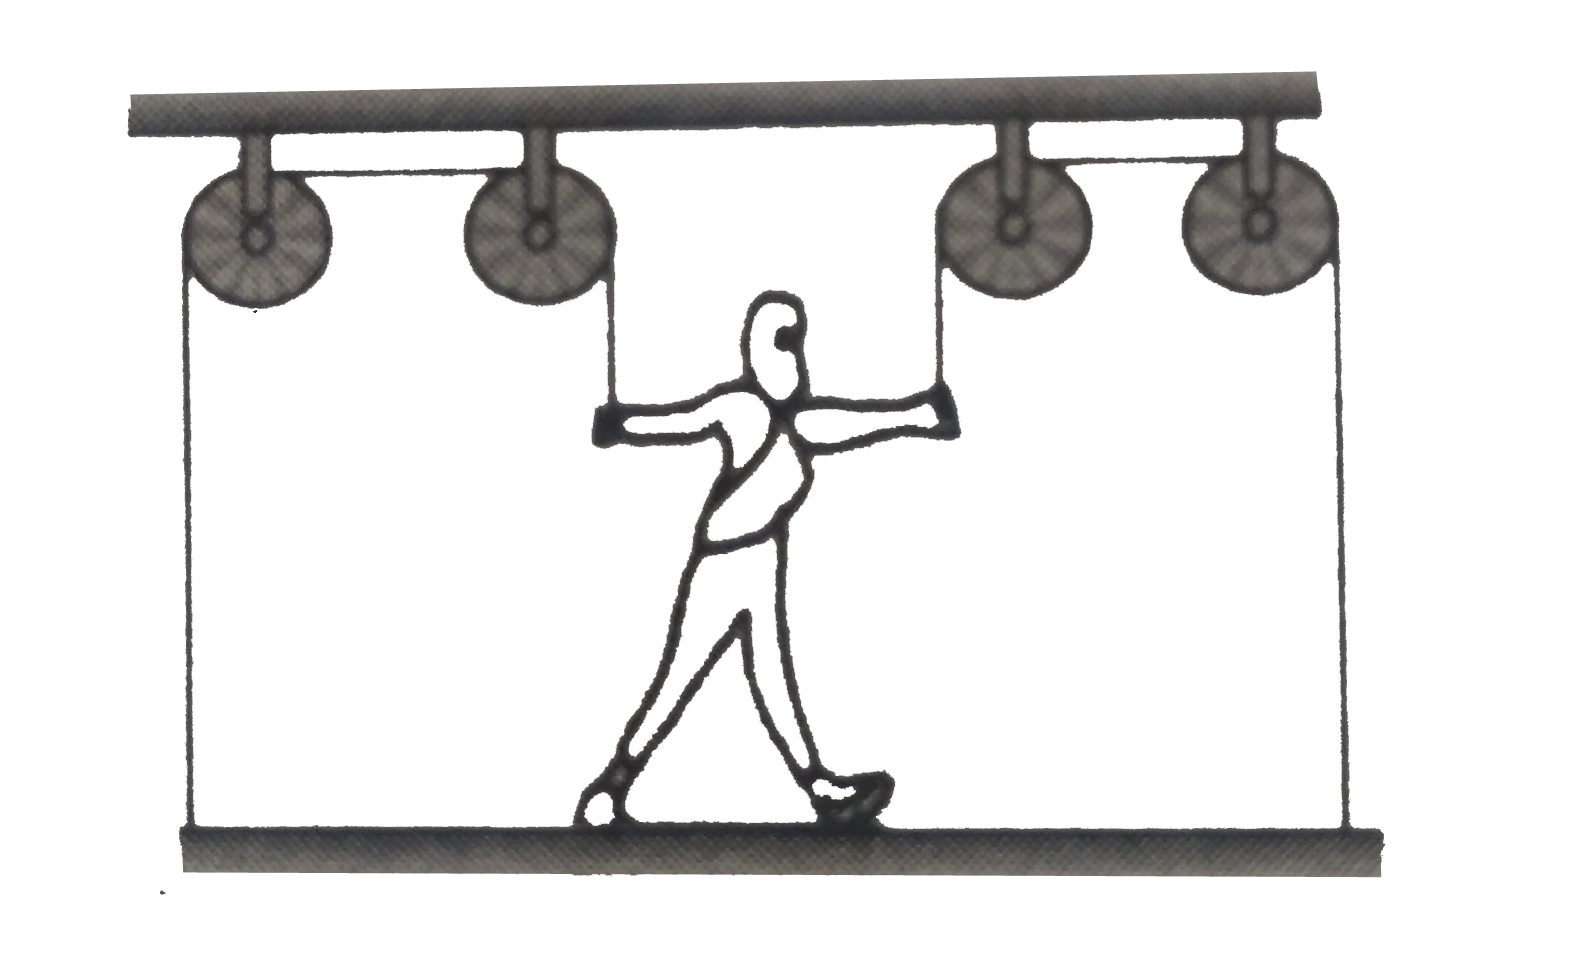 A painter of mass M stands on a platform of mass m and pulls himself up by two ropes which hang over pulley as shown in fig. He pulls each rope with force F and moves upward with a uniform acceleration a. find a, neglecting the fact that no one could do this for long time.